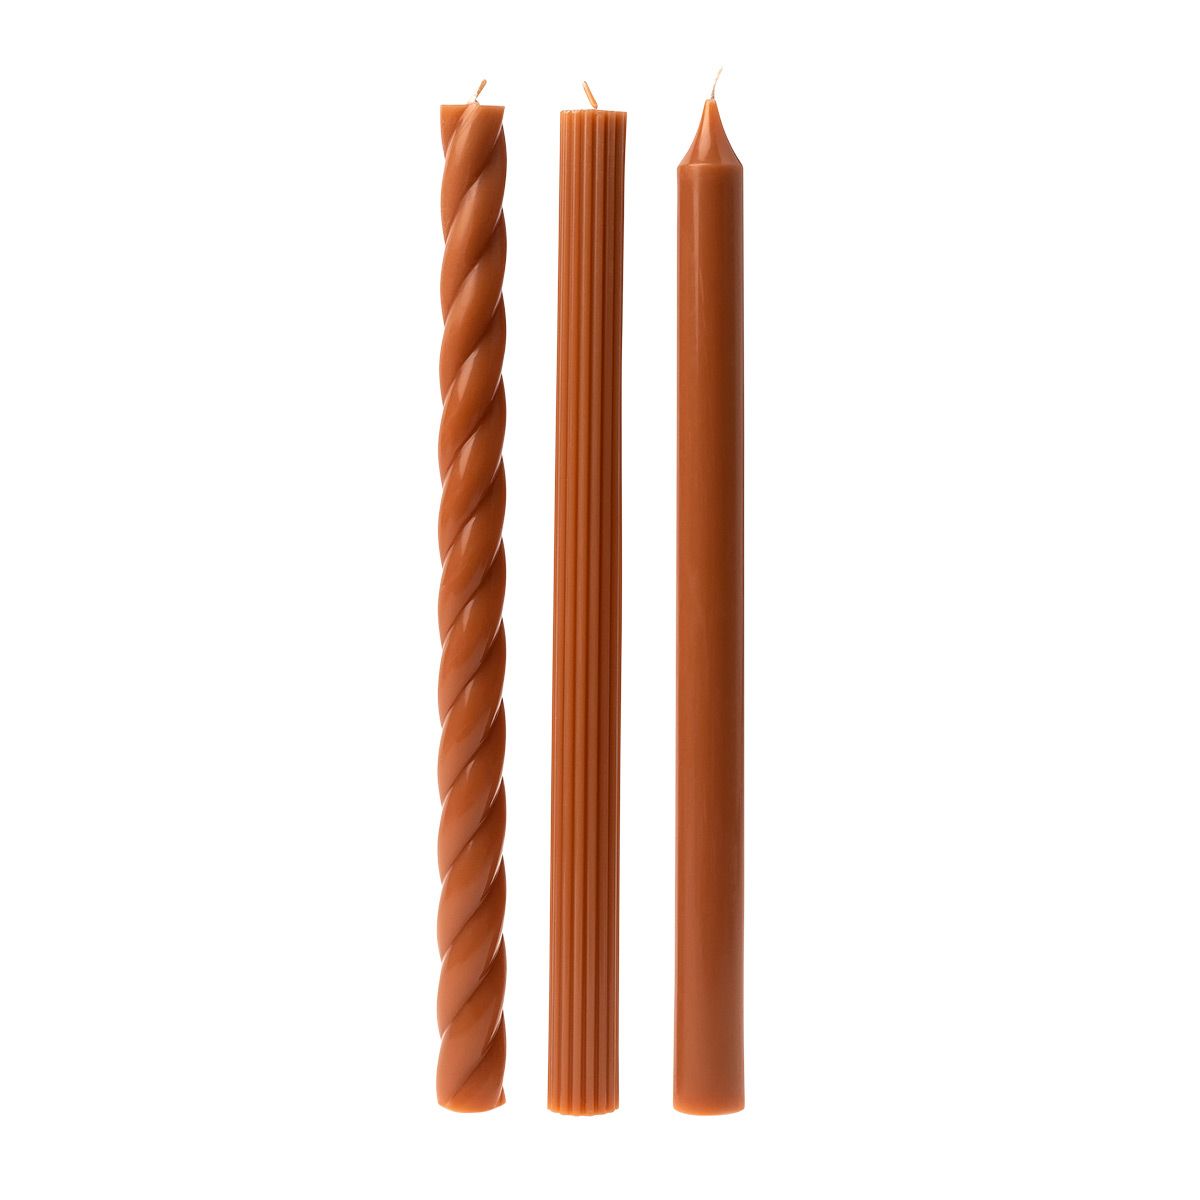 ILLUME Unscented Assorted Taper Candles Terra Cotta Set of 3 | The Container Store